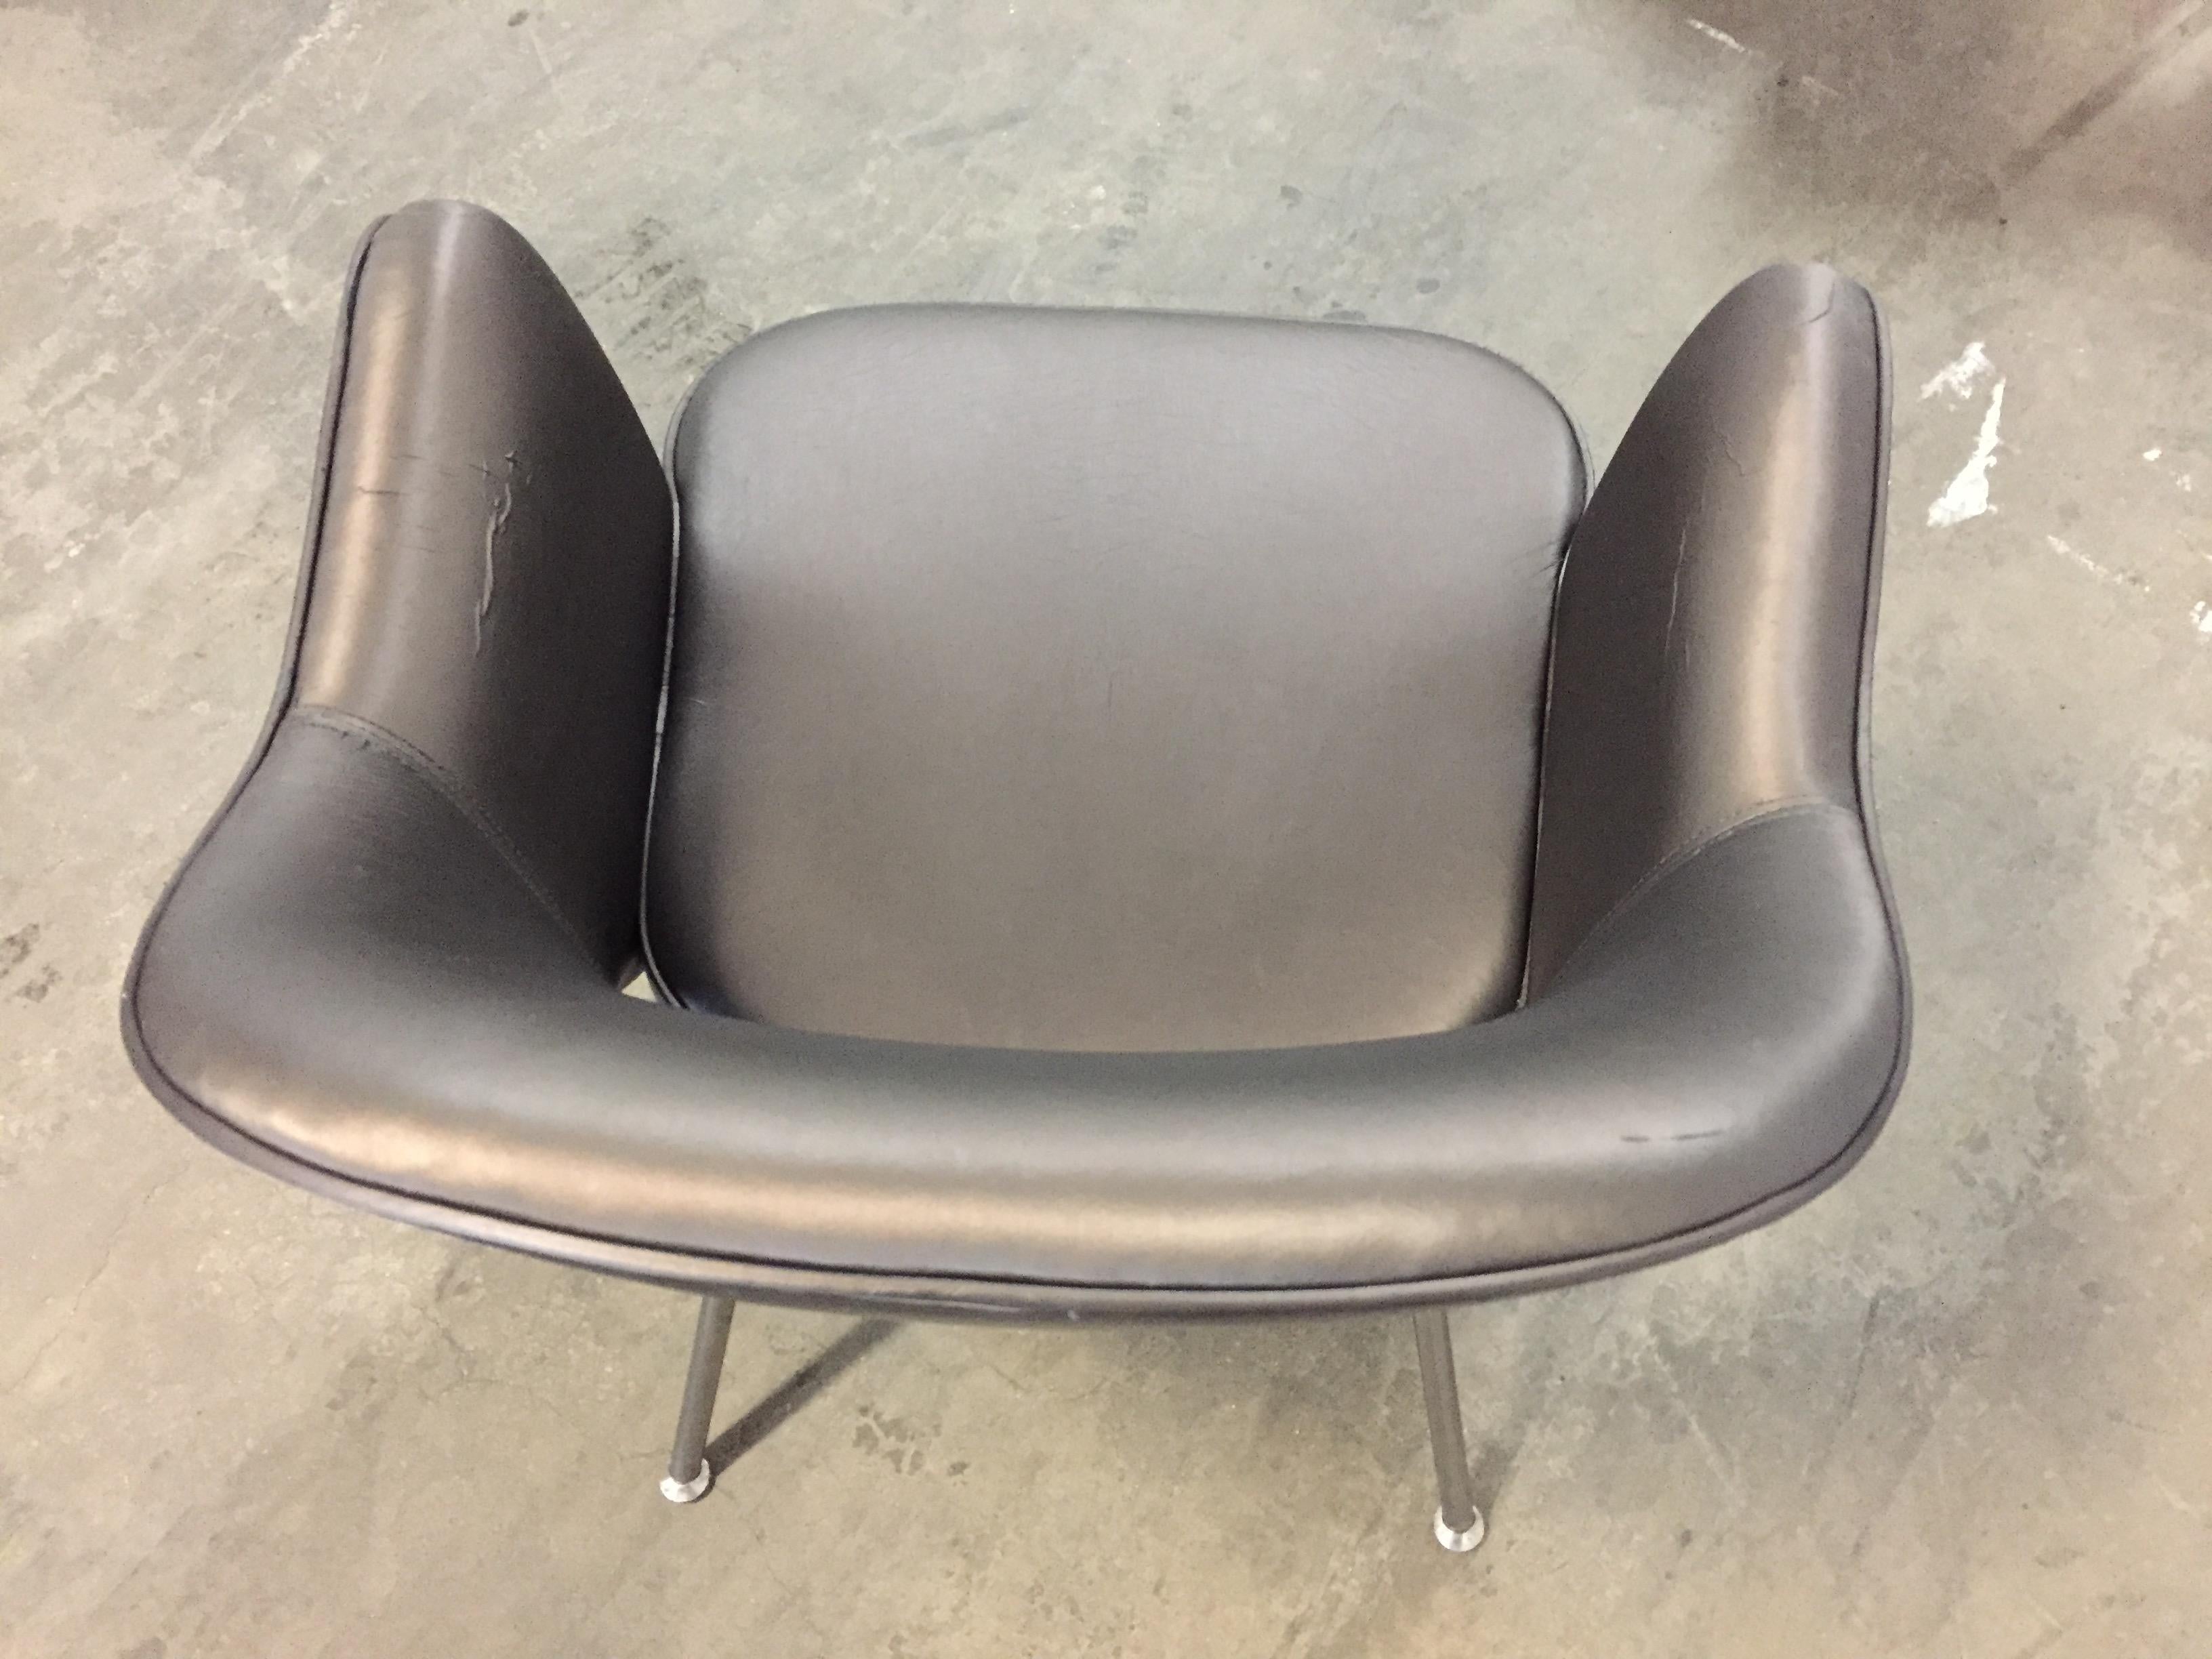 Upholstery 1975 Knoll Saarinen Executive Dining or Office Chairs/ Set of 6 For Sale